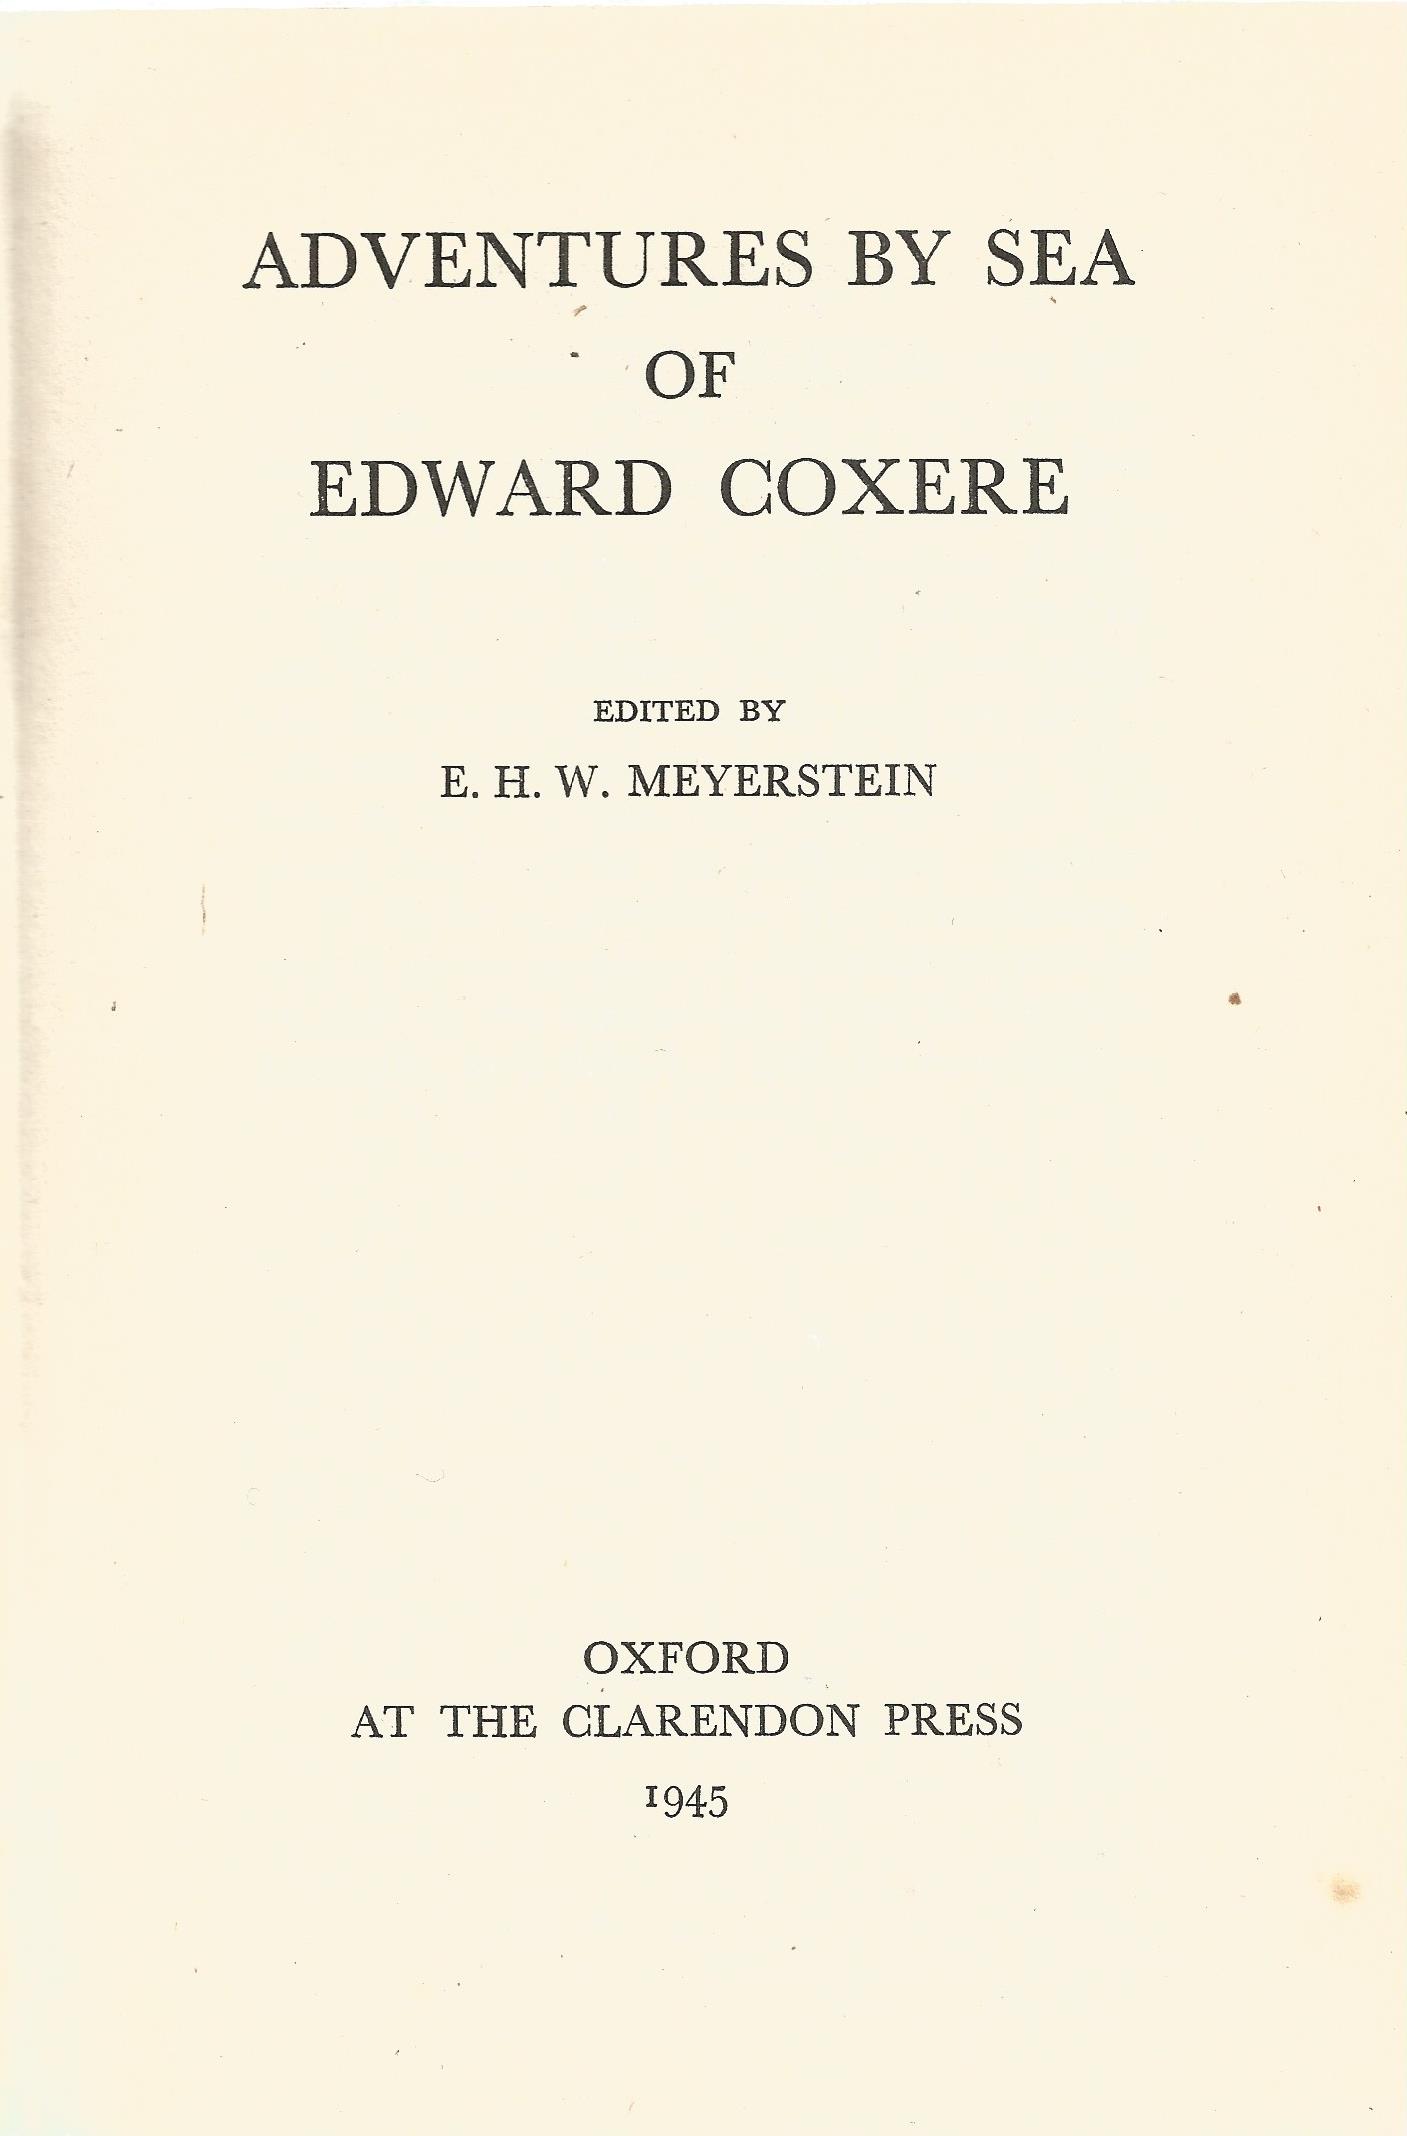 Adventures by Sea of Edward Coxere edited by E H W Meyerstein 1945 First Edition Hardback Book - Image 2 of 3